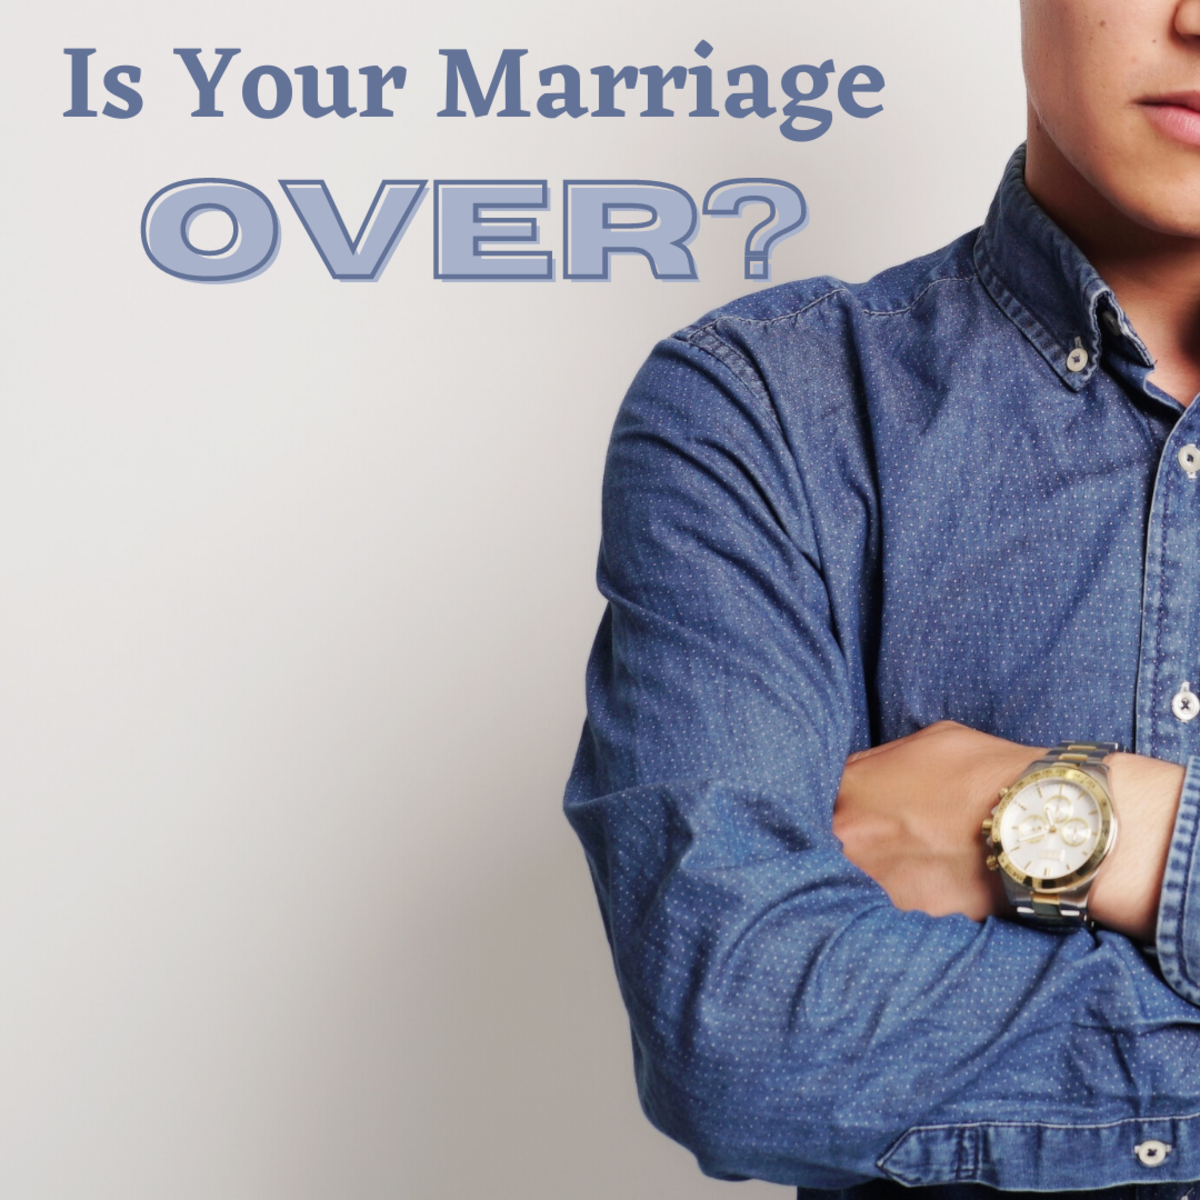 Are you wondering if your marriage is over? Here are some signs that it's on its last legs.